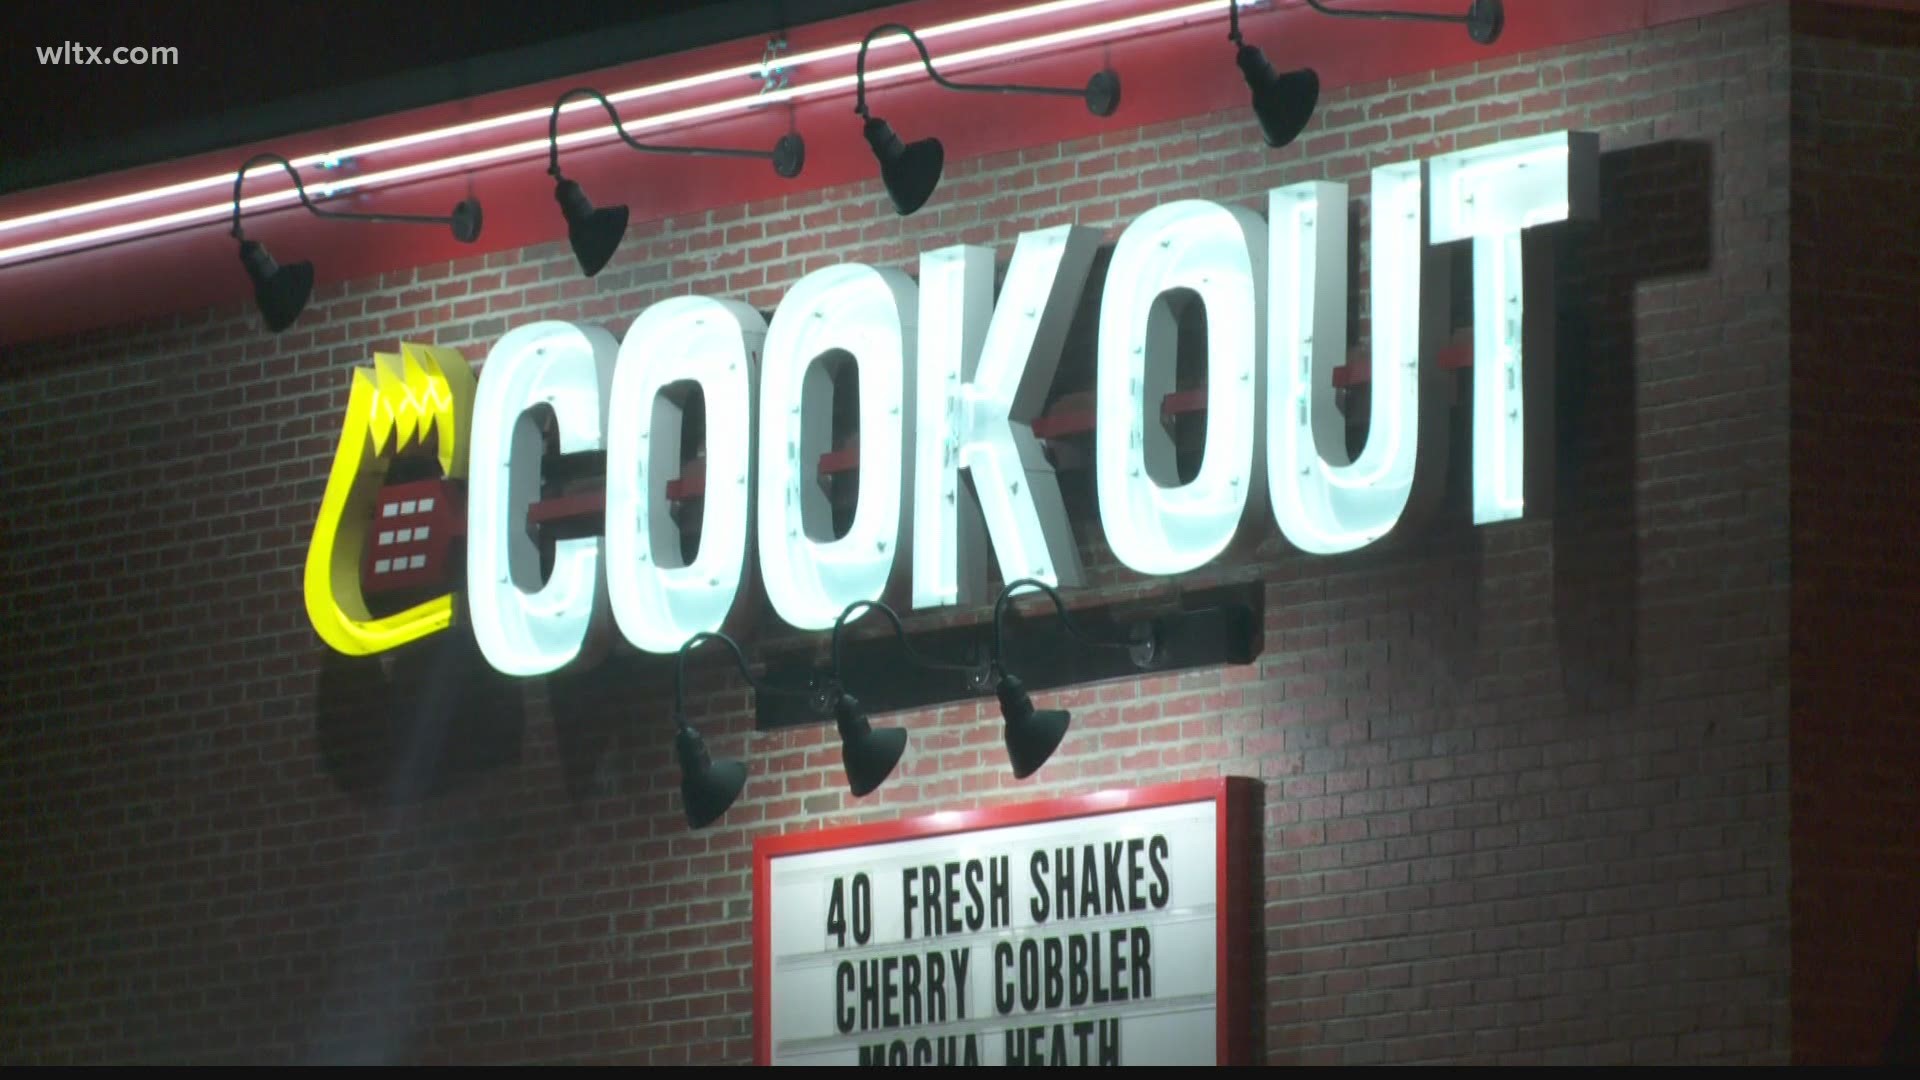 "It's not that we want to keep Cookout away because we like milkshakes, but we don't want it in our front yard,” said Jackie Banton.